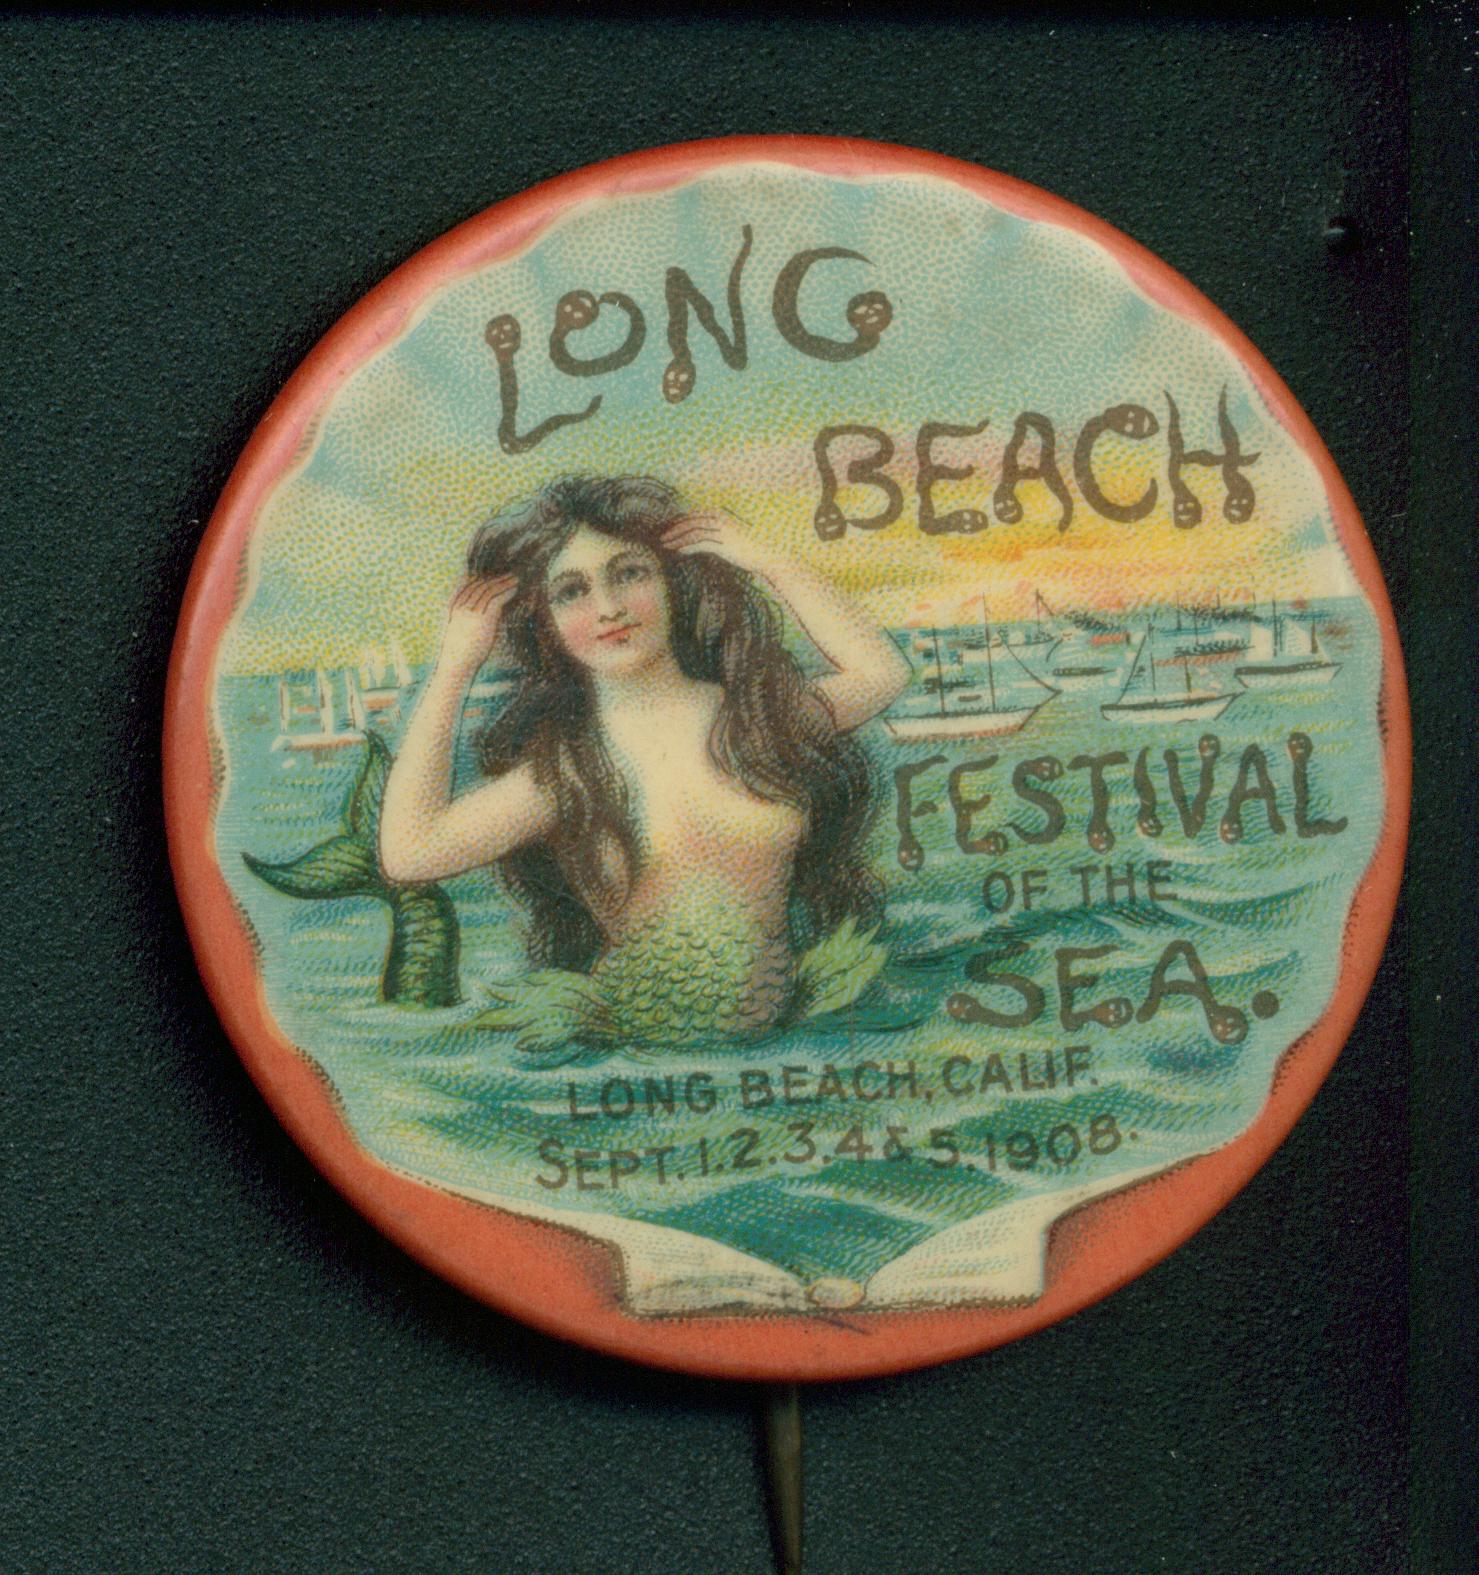  Long Beach Festival of the Sea:  Sept. 3,4,&5, 1908.  Shows Mermaid coming out of the water, boats in background.